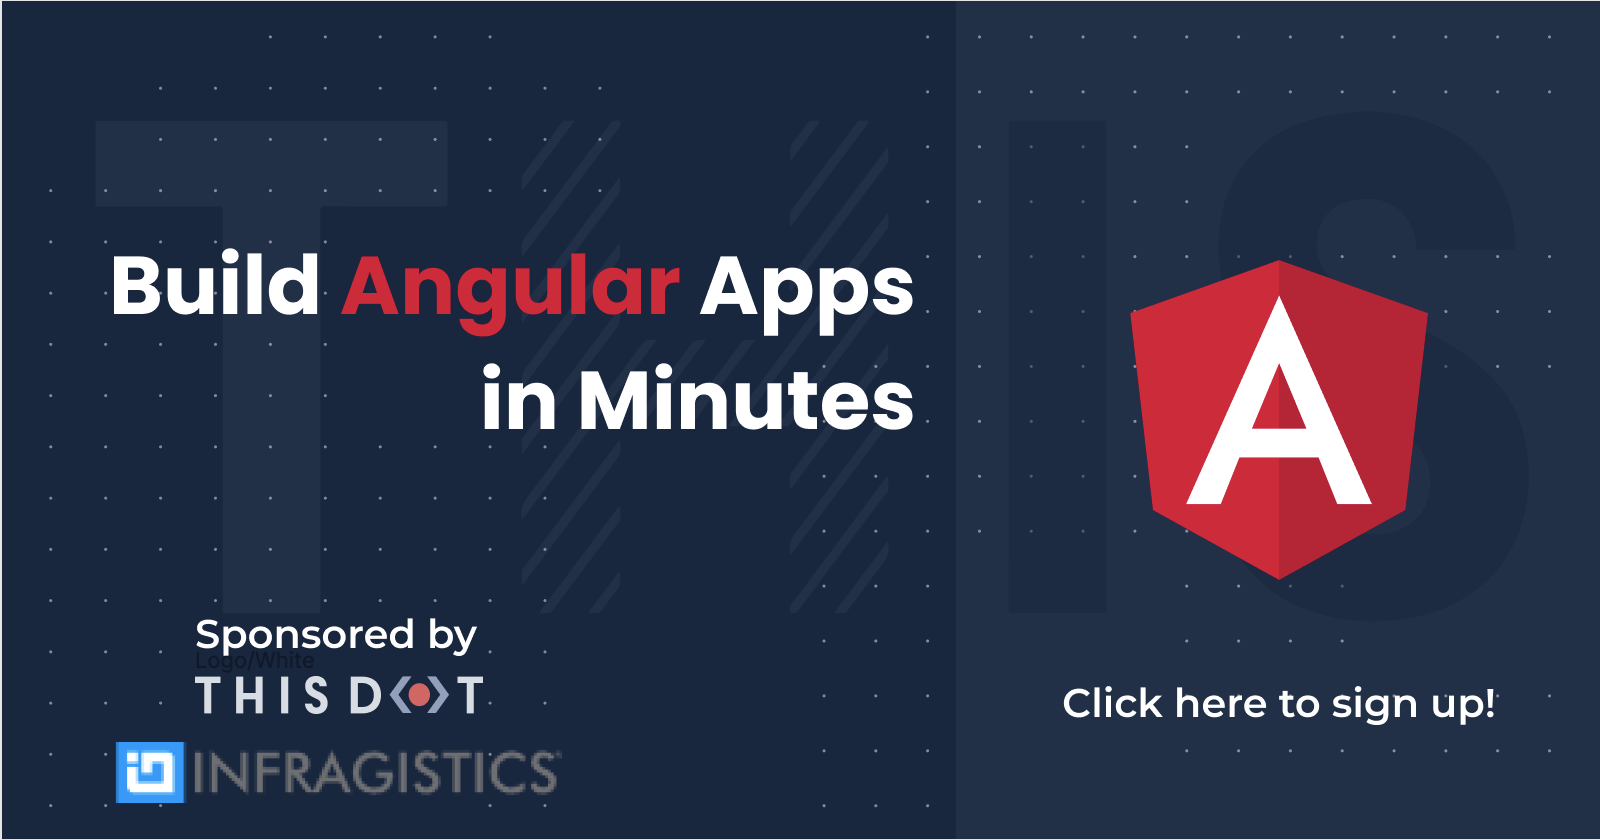 Build Angular Apps in Minutes (link)